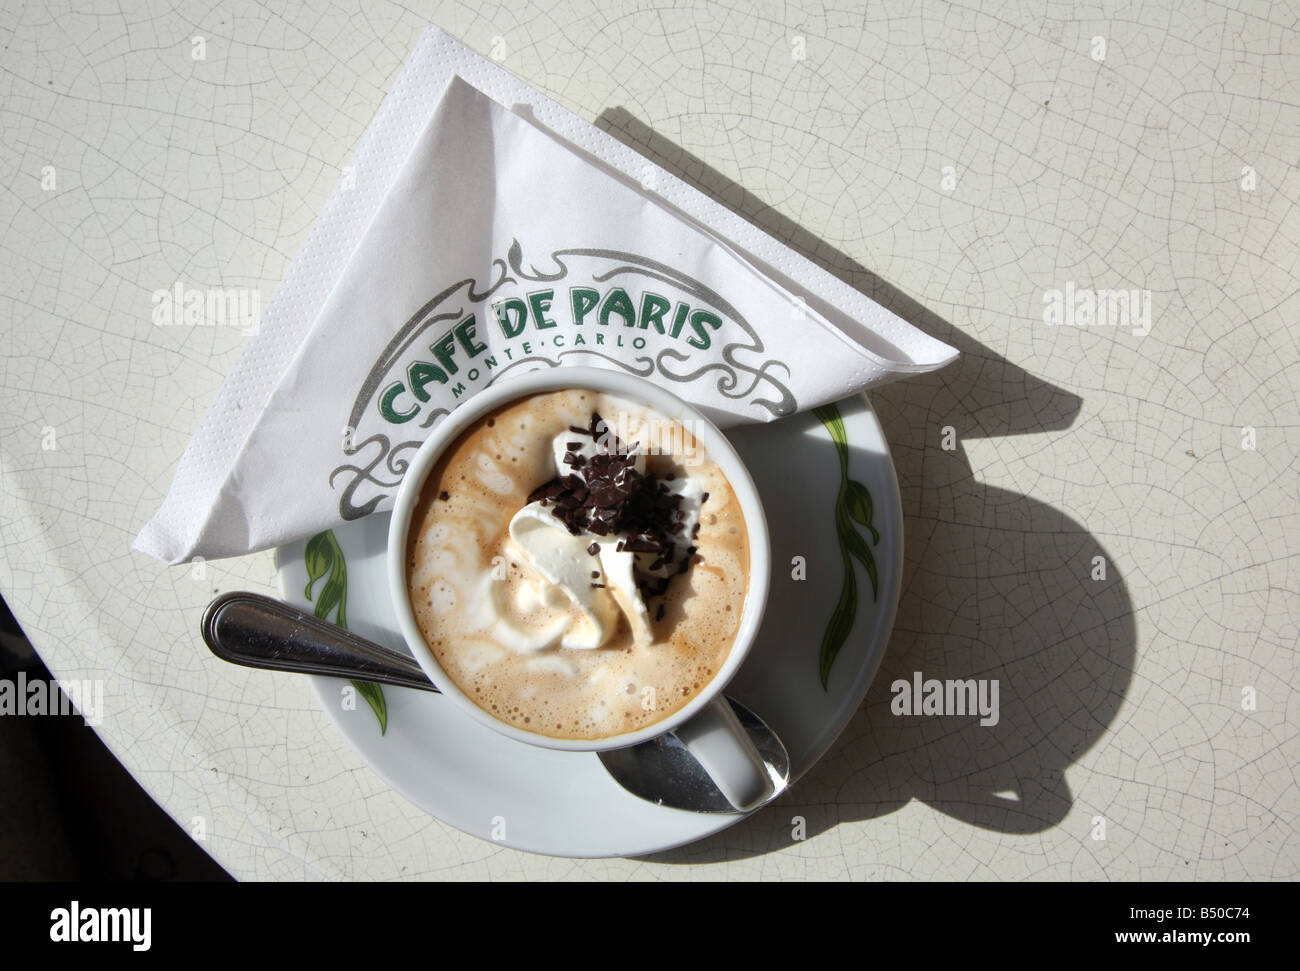 Coffee cup with chantilly cream topping at Cafe De Paris Monte Carlo Monaco. Cafe de Paris is outside the famous casino. Stock Photo